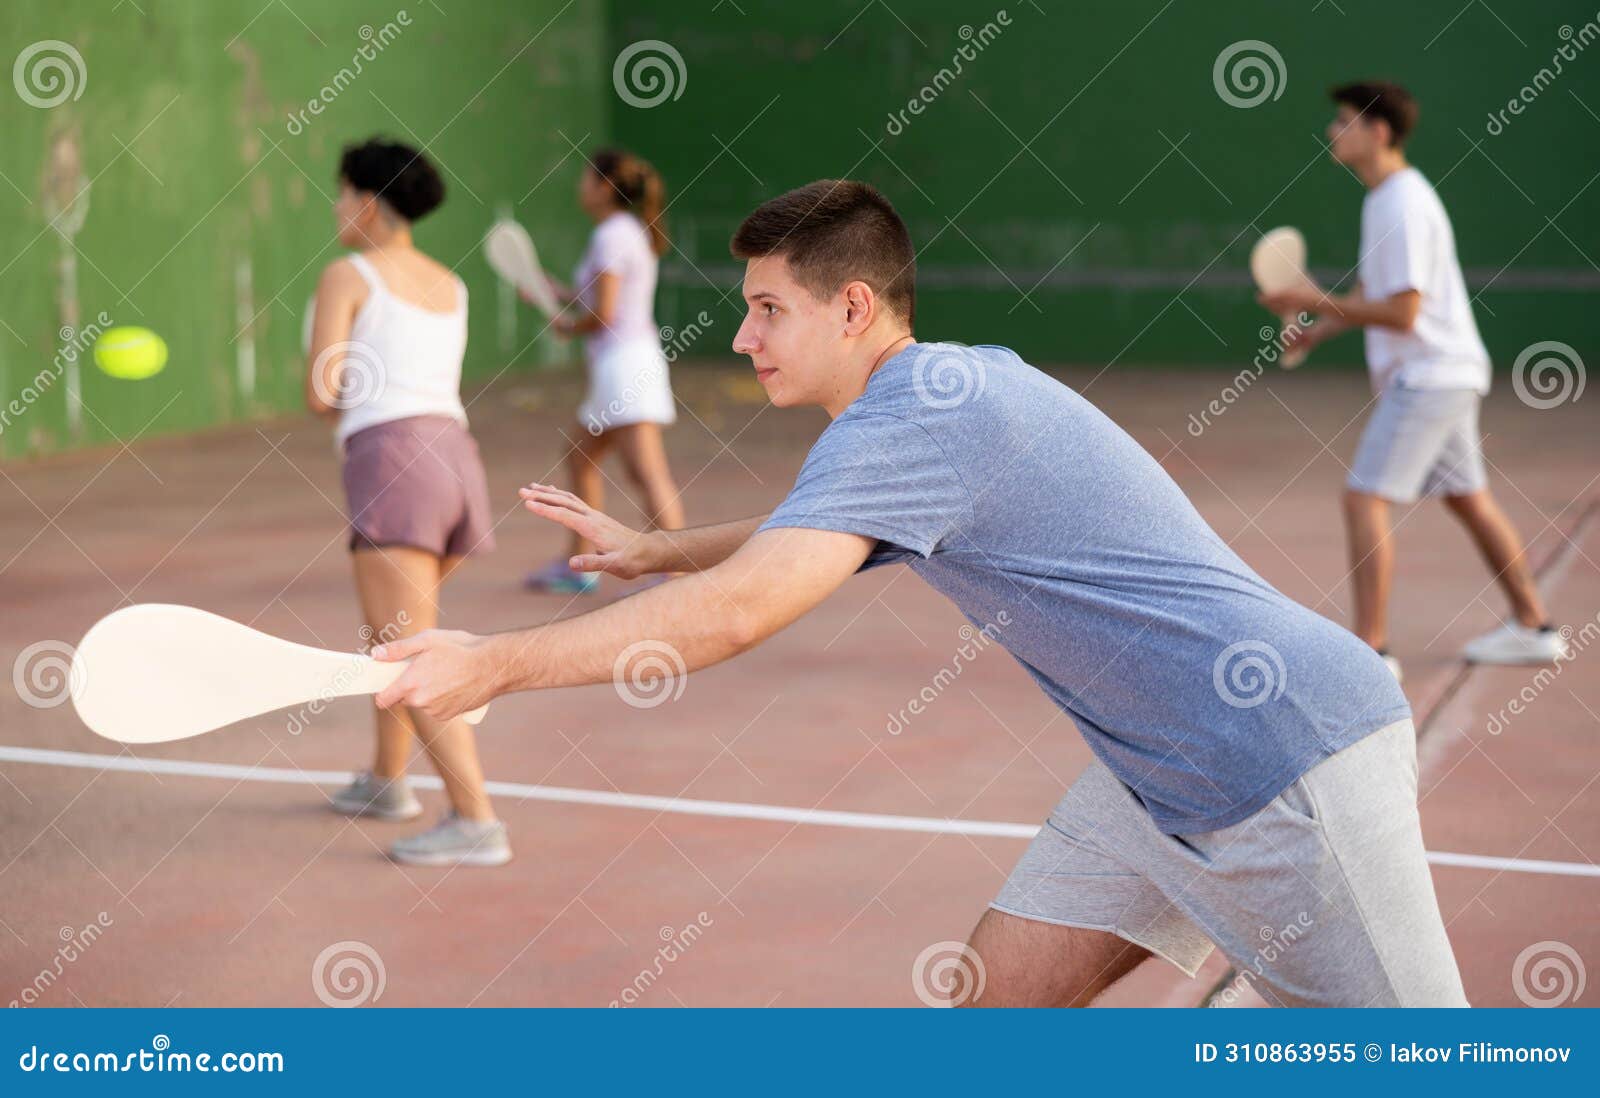 young male pelota player hitting ball with racket